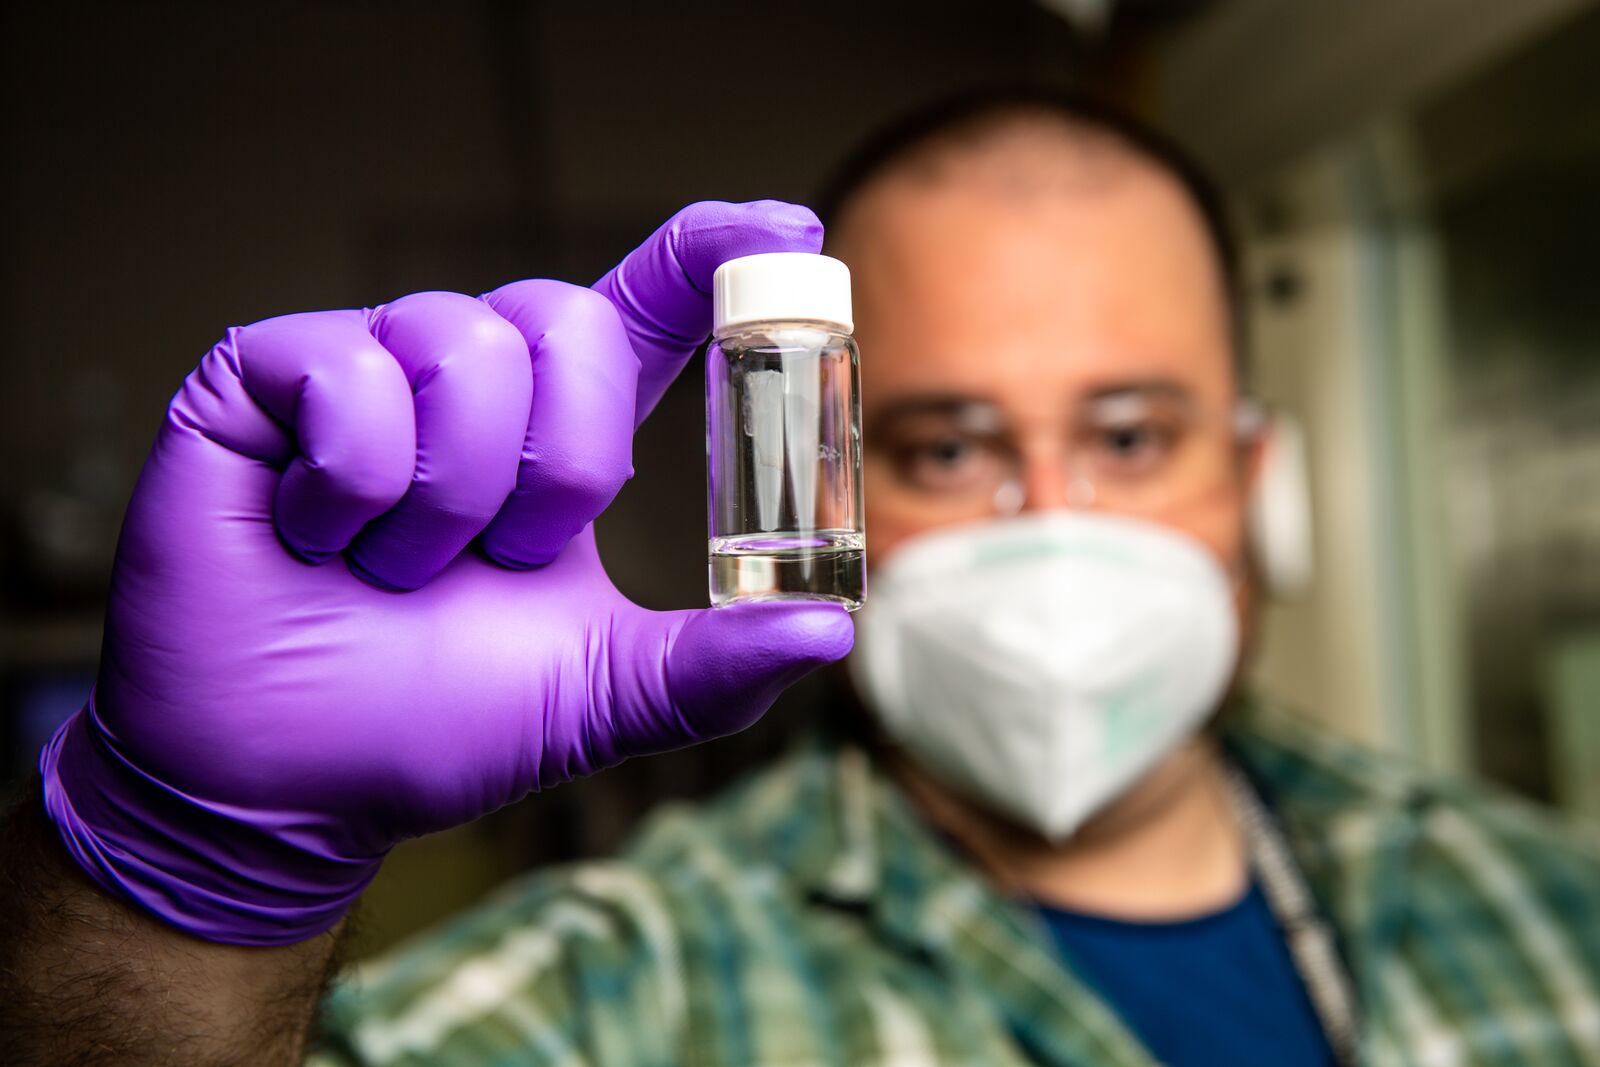 A scientist holds a vial of purified water